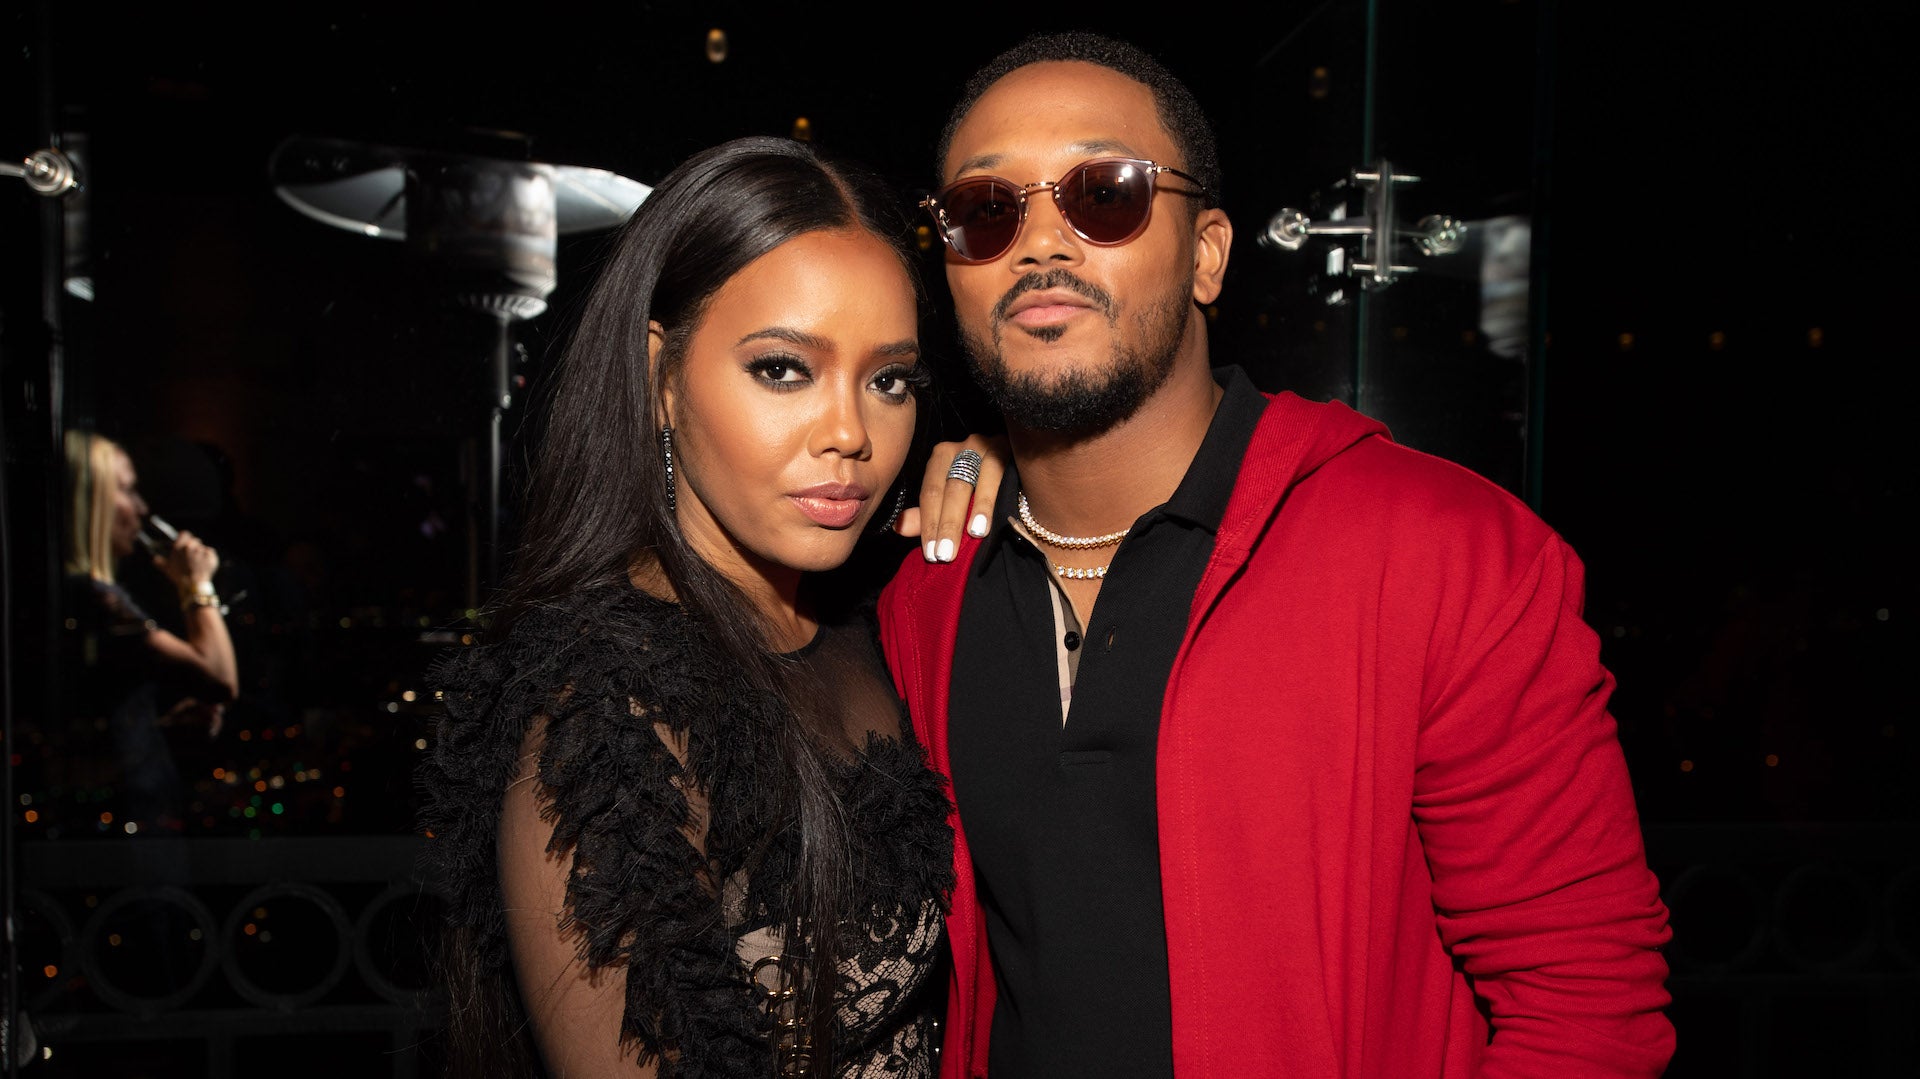 Angela Simmons Says Romeo Miller Broke His Promise To 'Be There' After Fiancé's Death: 'He Didn't Step Up' 